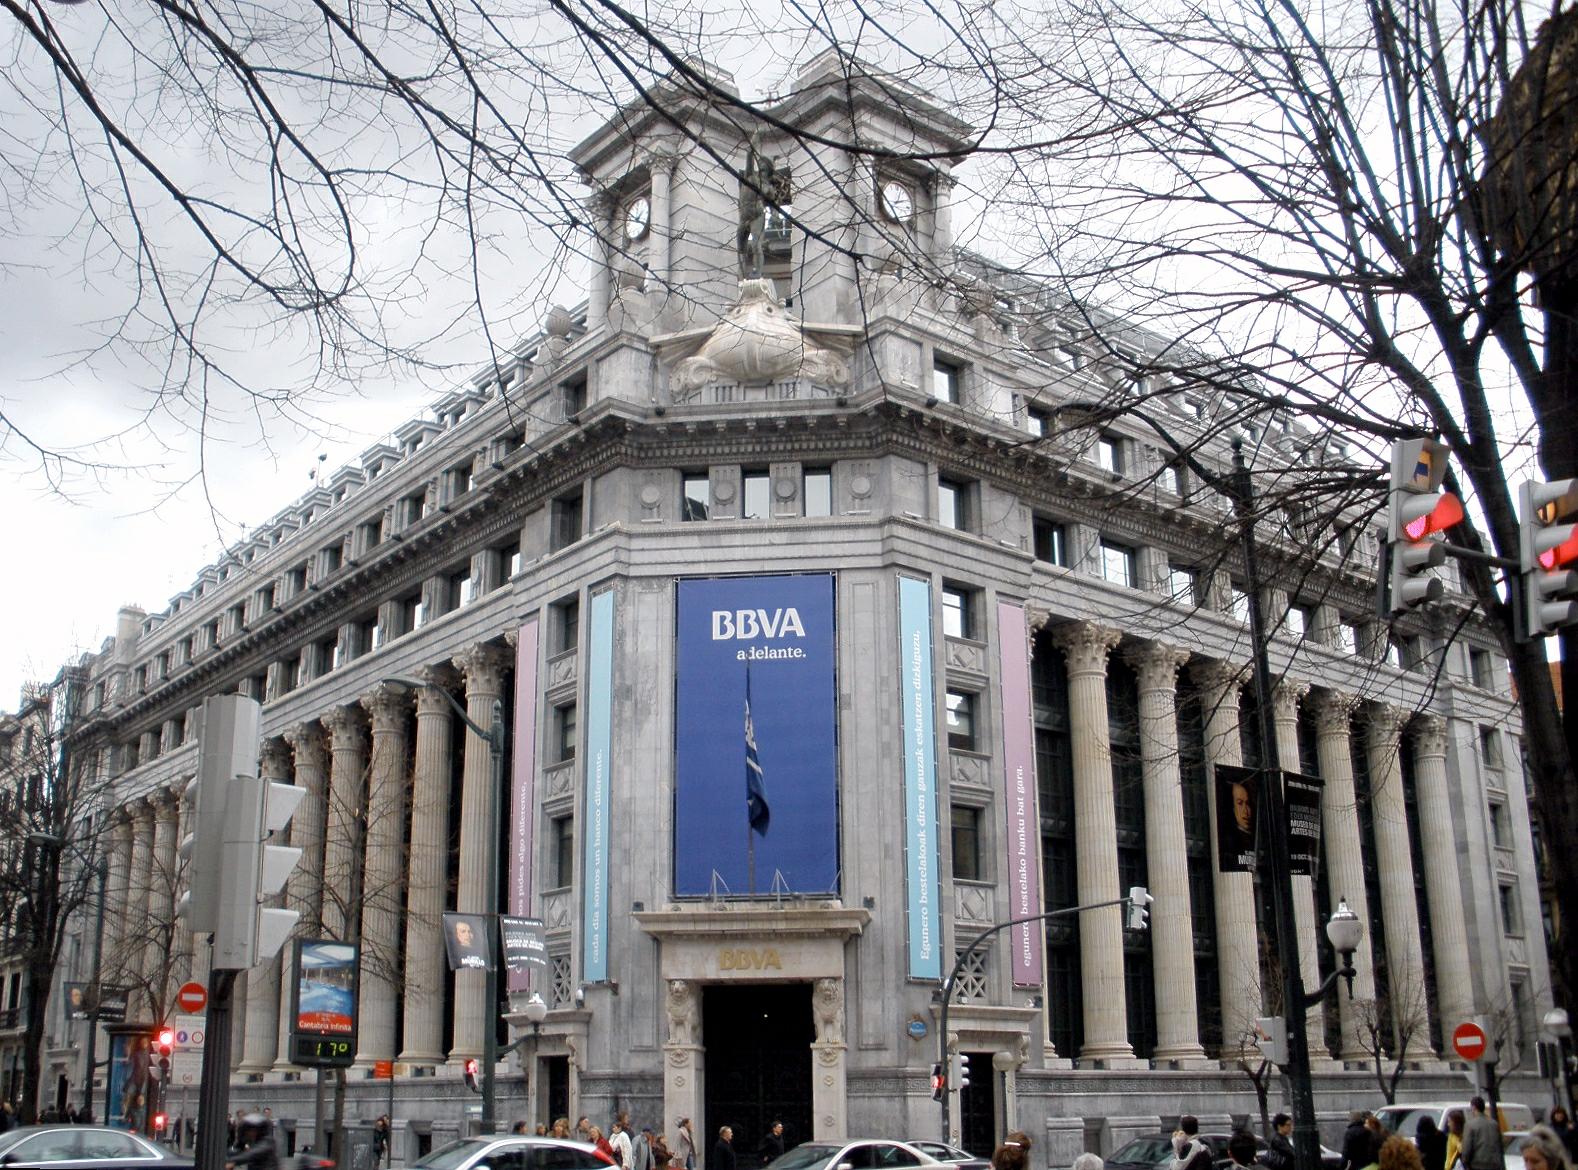 BBVA is the second-largest bank in Spain (source: Zarateman / Wikipedia Commons)